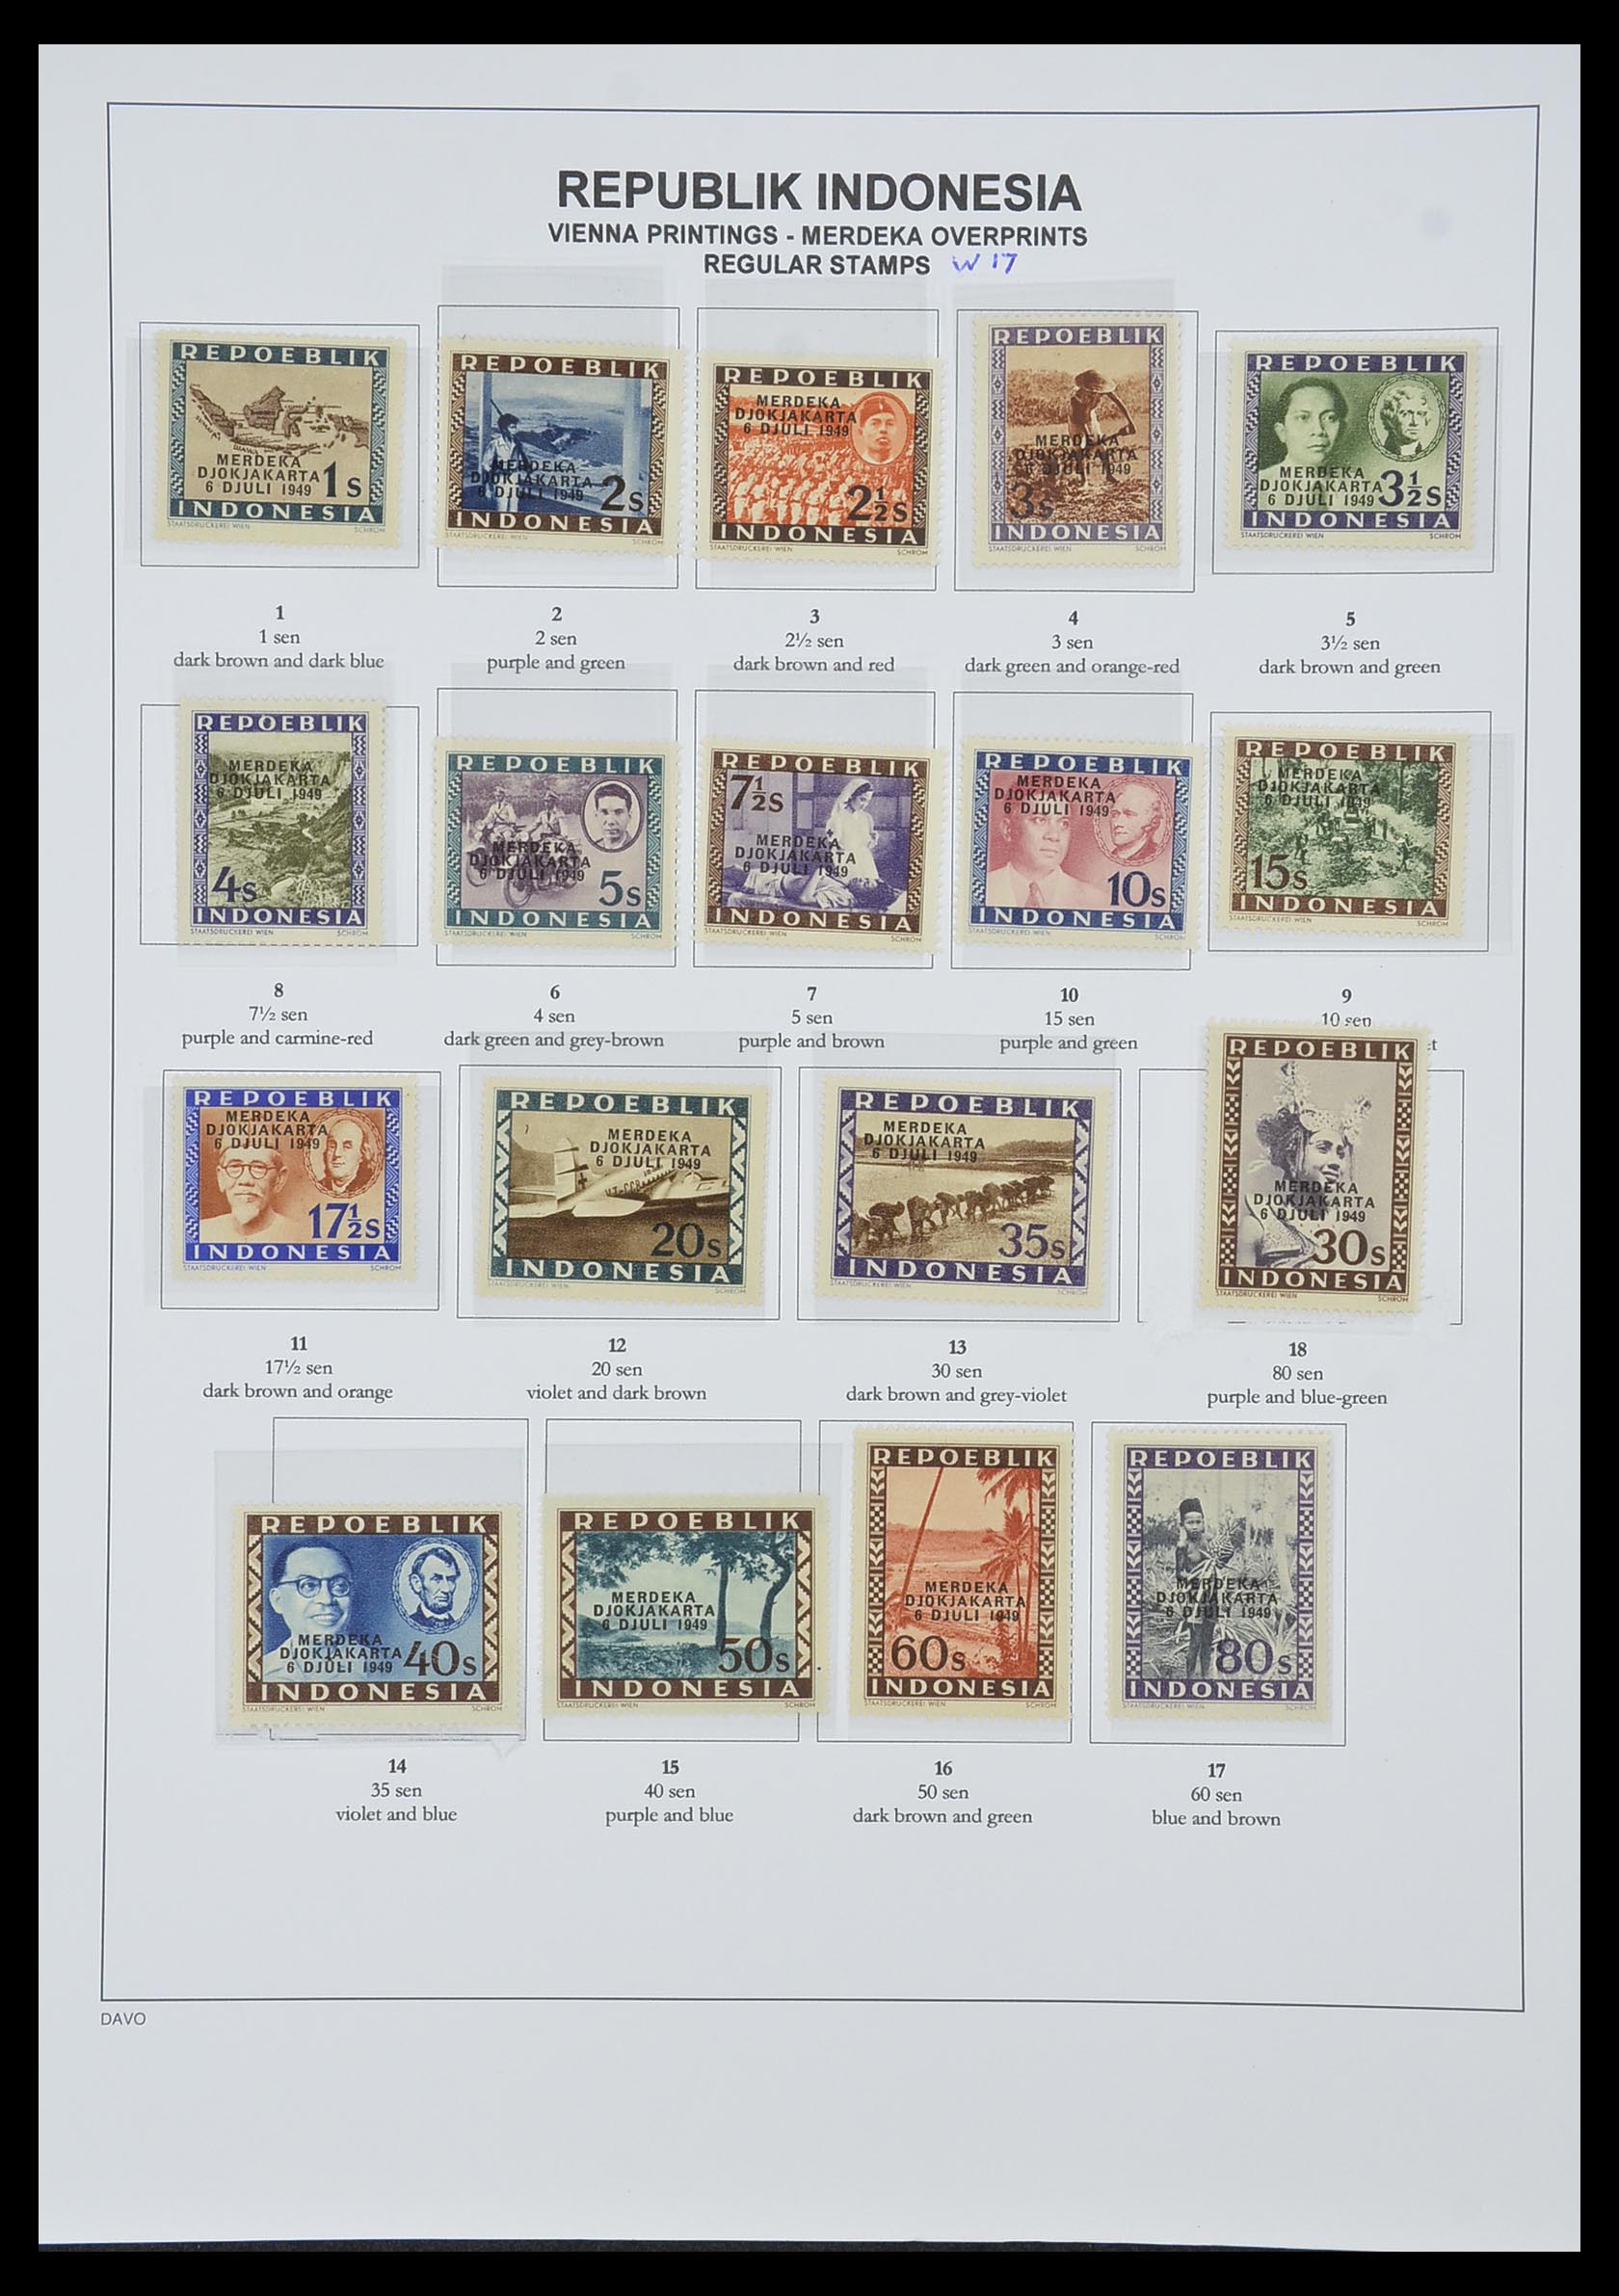 33988 032 - Stamp collection 33988 Vienna printings Indonesia.